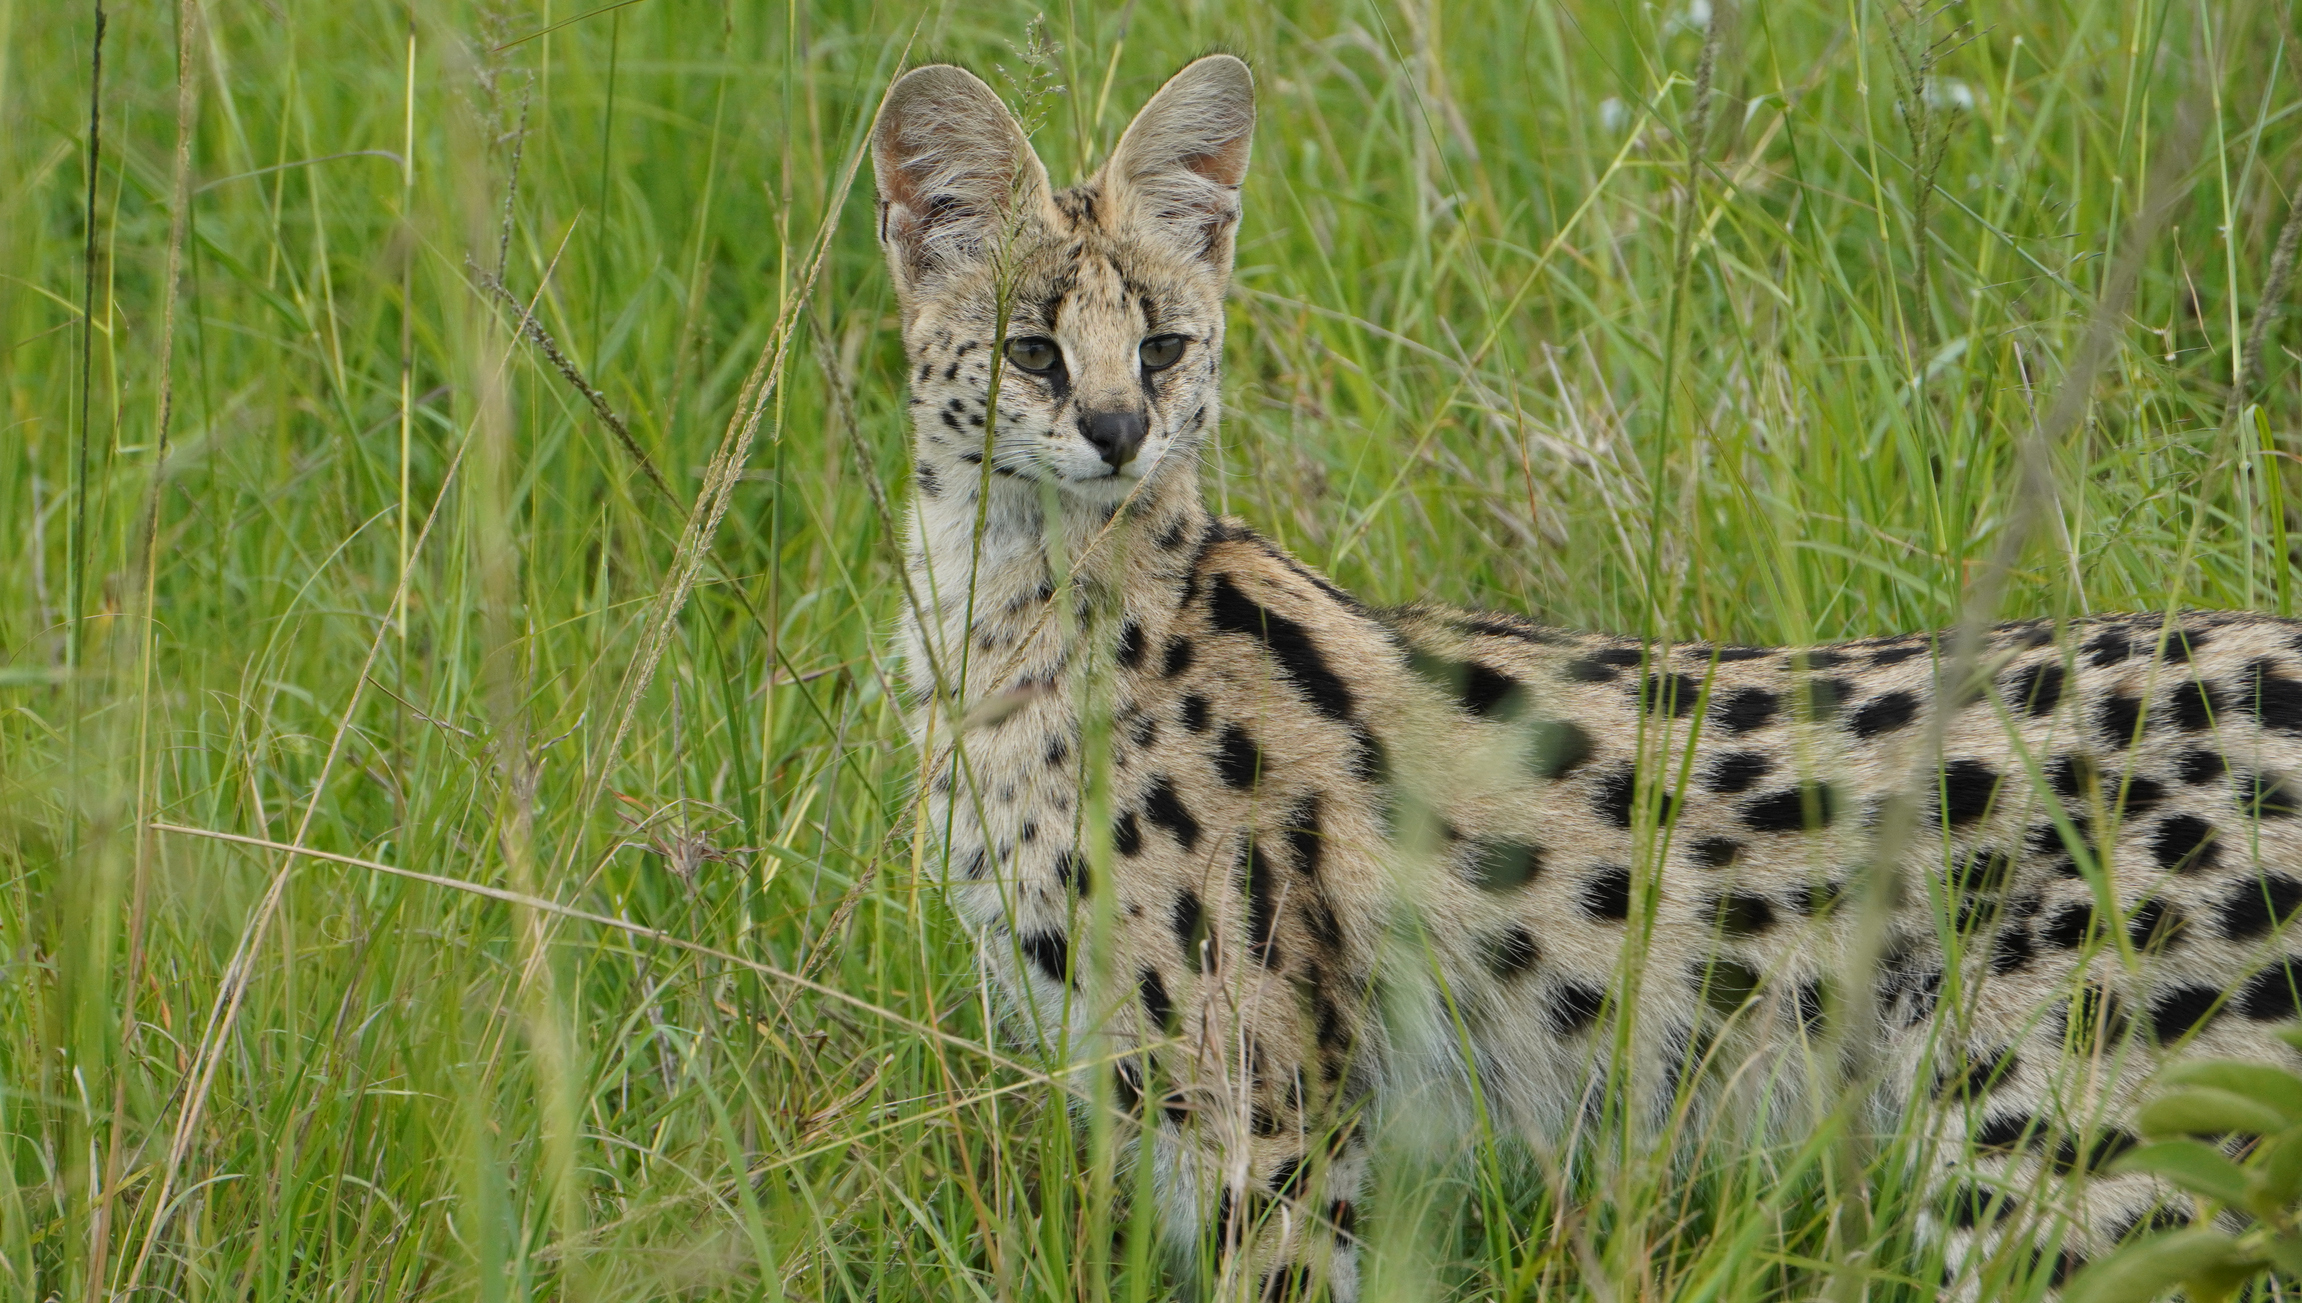 The serval is one of Scotland's most popular 'exotic pets' despite fears over cross-breeding with domestic cats. (Image: iStock)